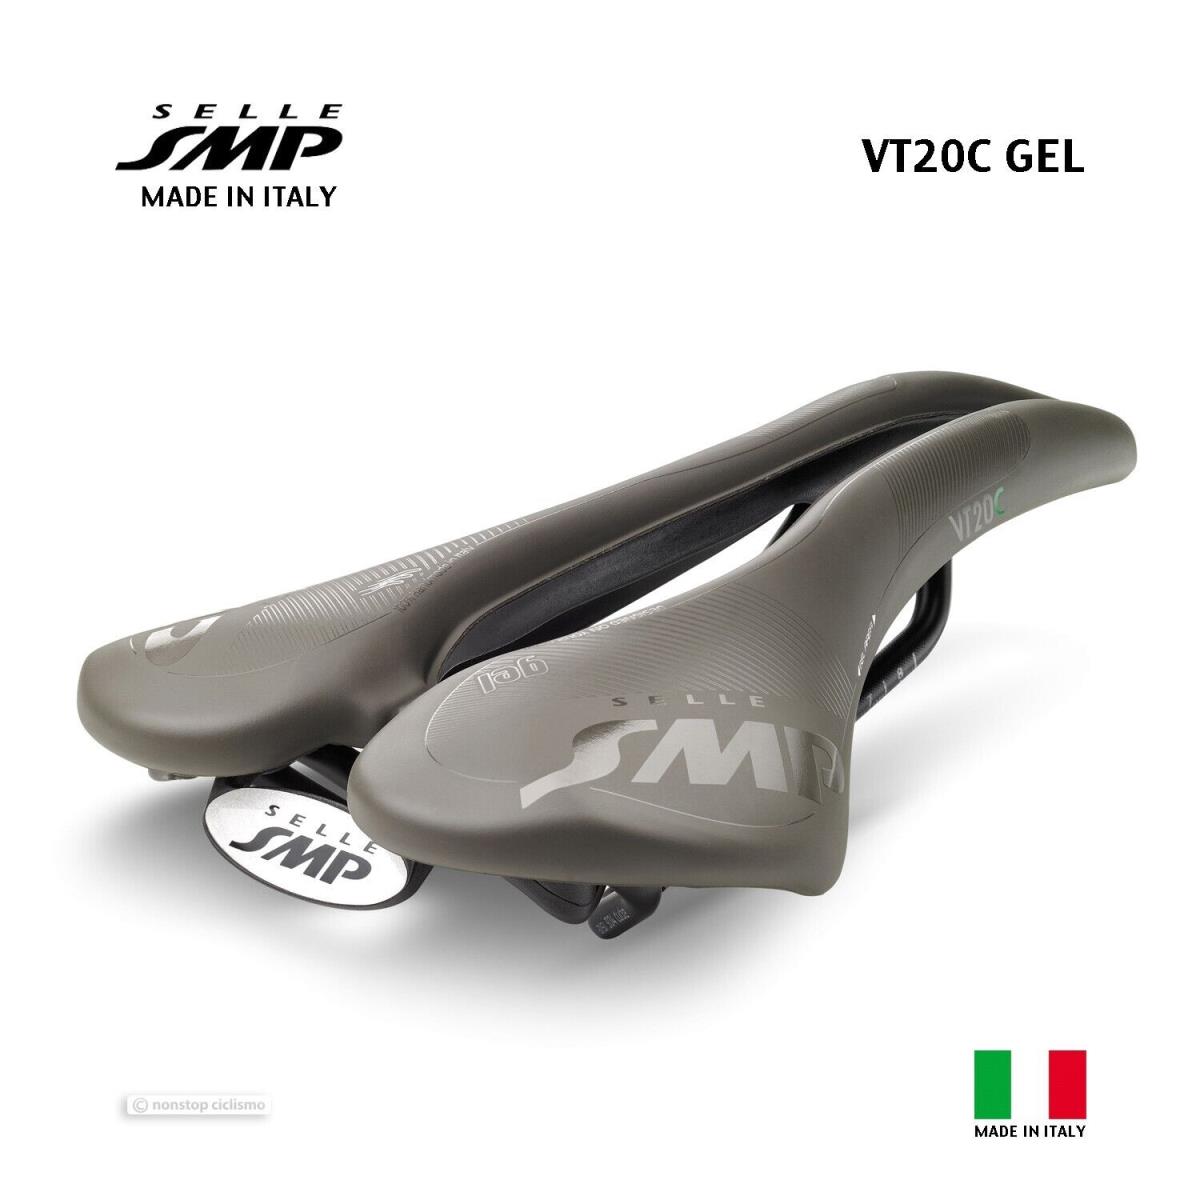 Selle Smp VT20C Gel Saddle : Grey-brown - Made IN Italy